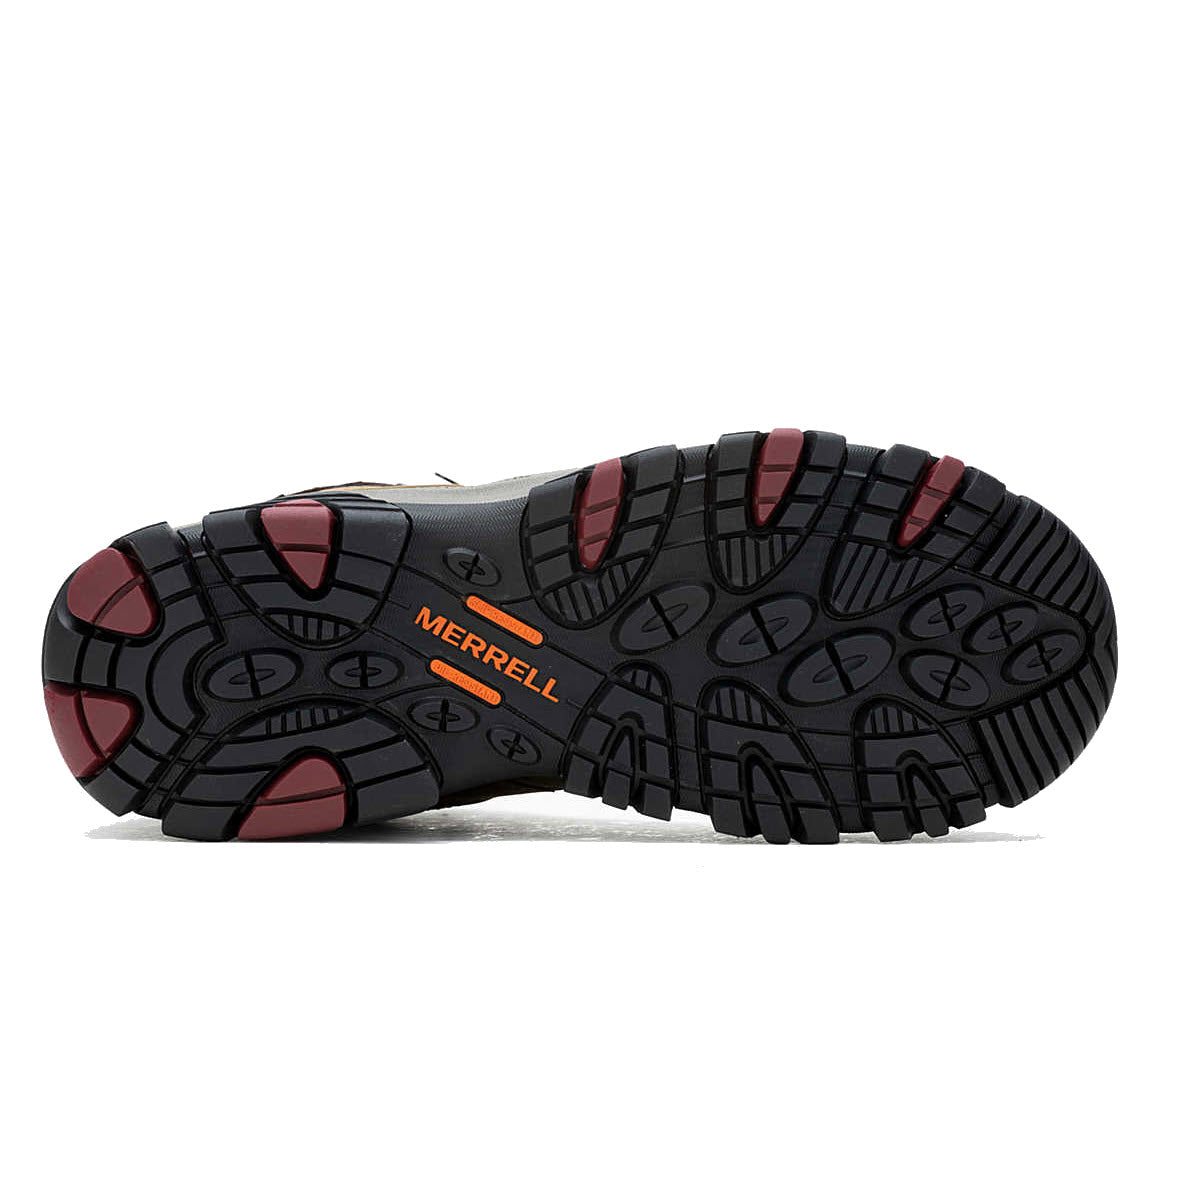 Treaded sole of a Merrell hiking shoe with black and red detailing, displaying the Merrell brand name prominently, and featuring an EH-rated protection.